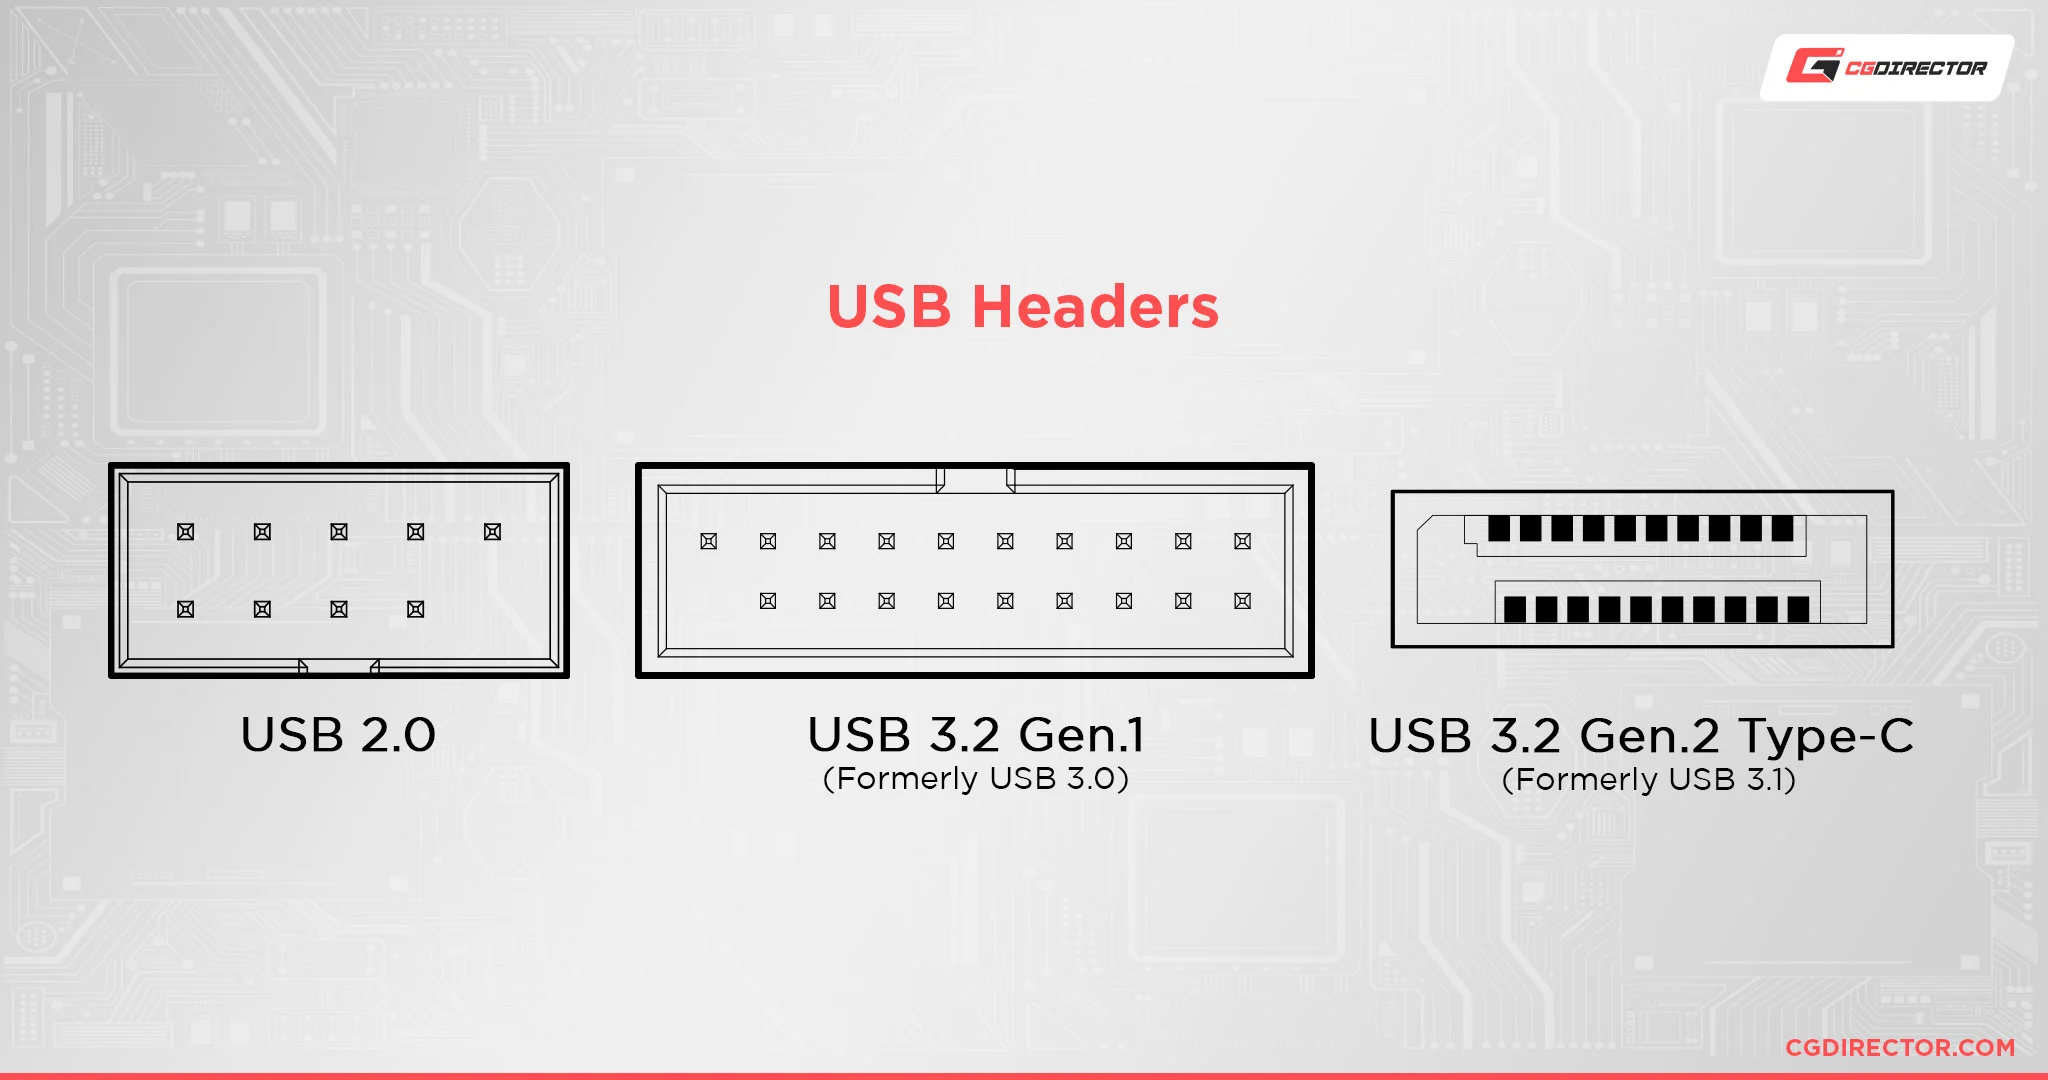 USB 3.2 Gen 1 and Gen 2 Headers.<br>From “What Are USB Headers & How Do You Get More”